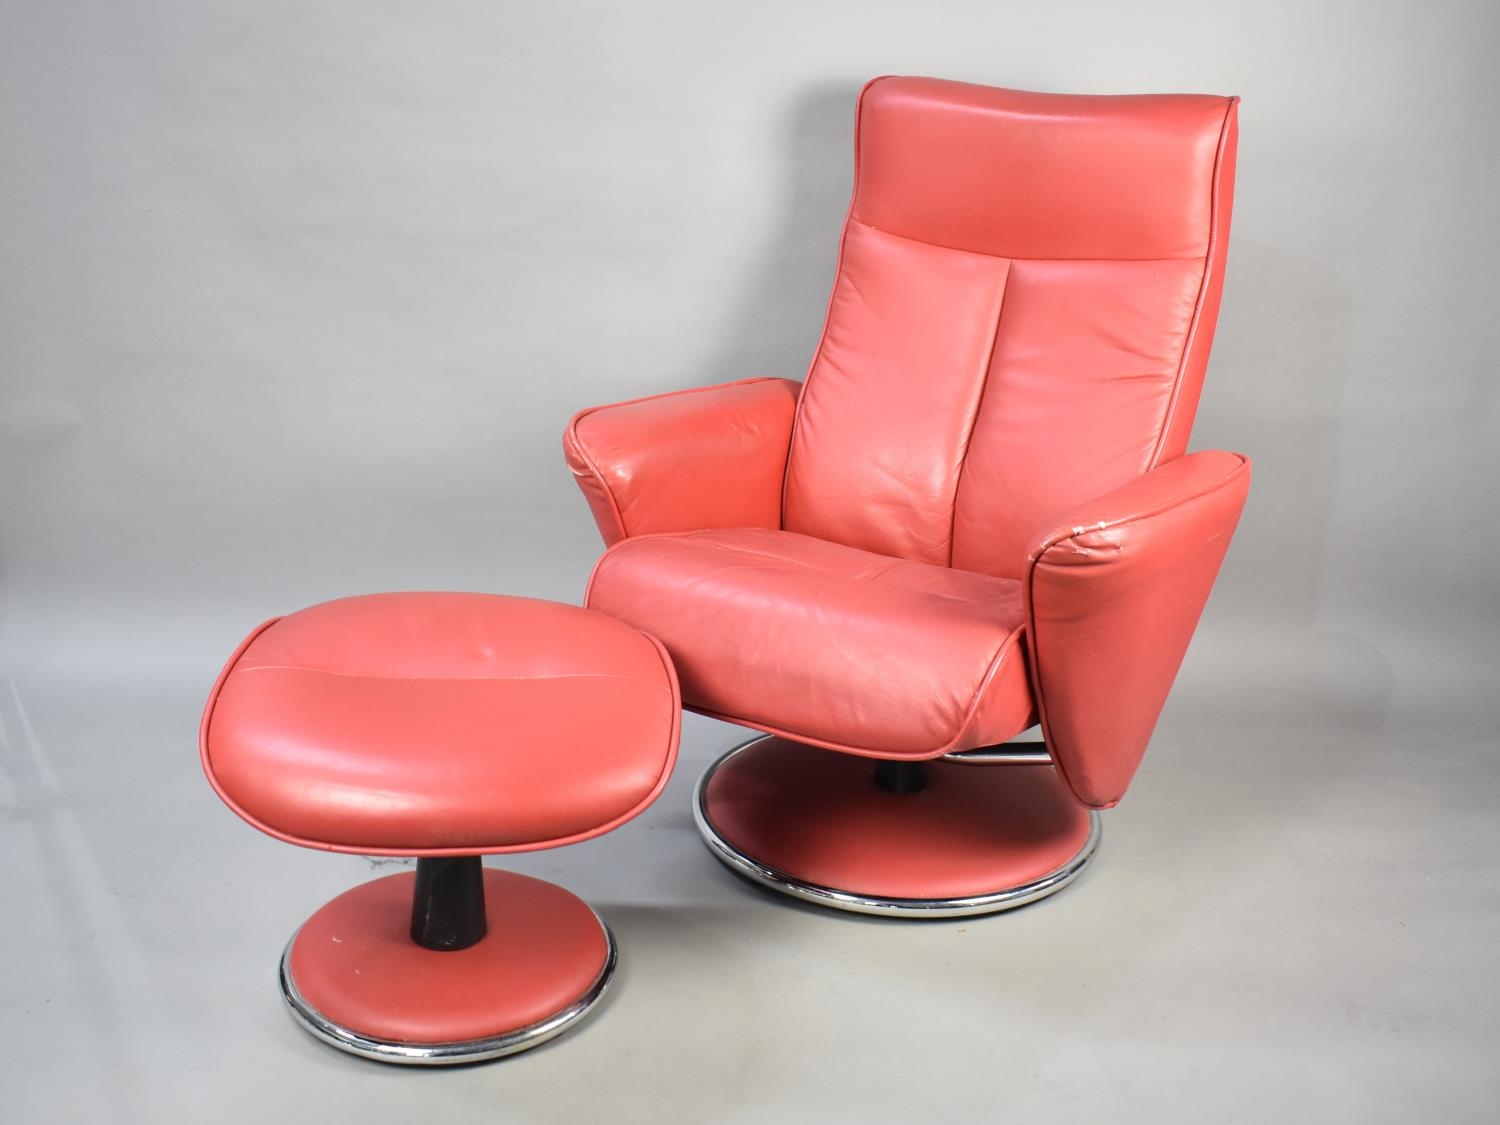 A G-Plan Red Leather Reclining Easy Lounge Swivel Armchair with Matching Footrest